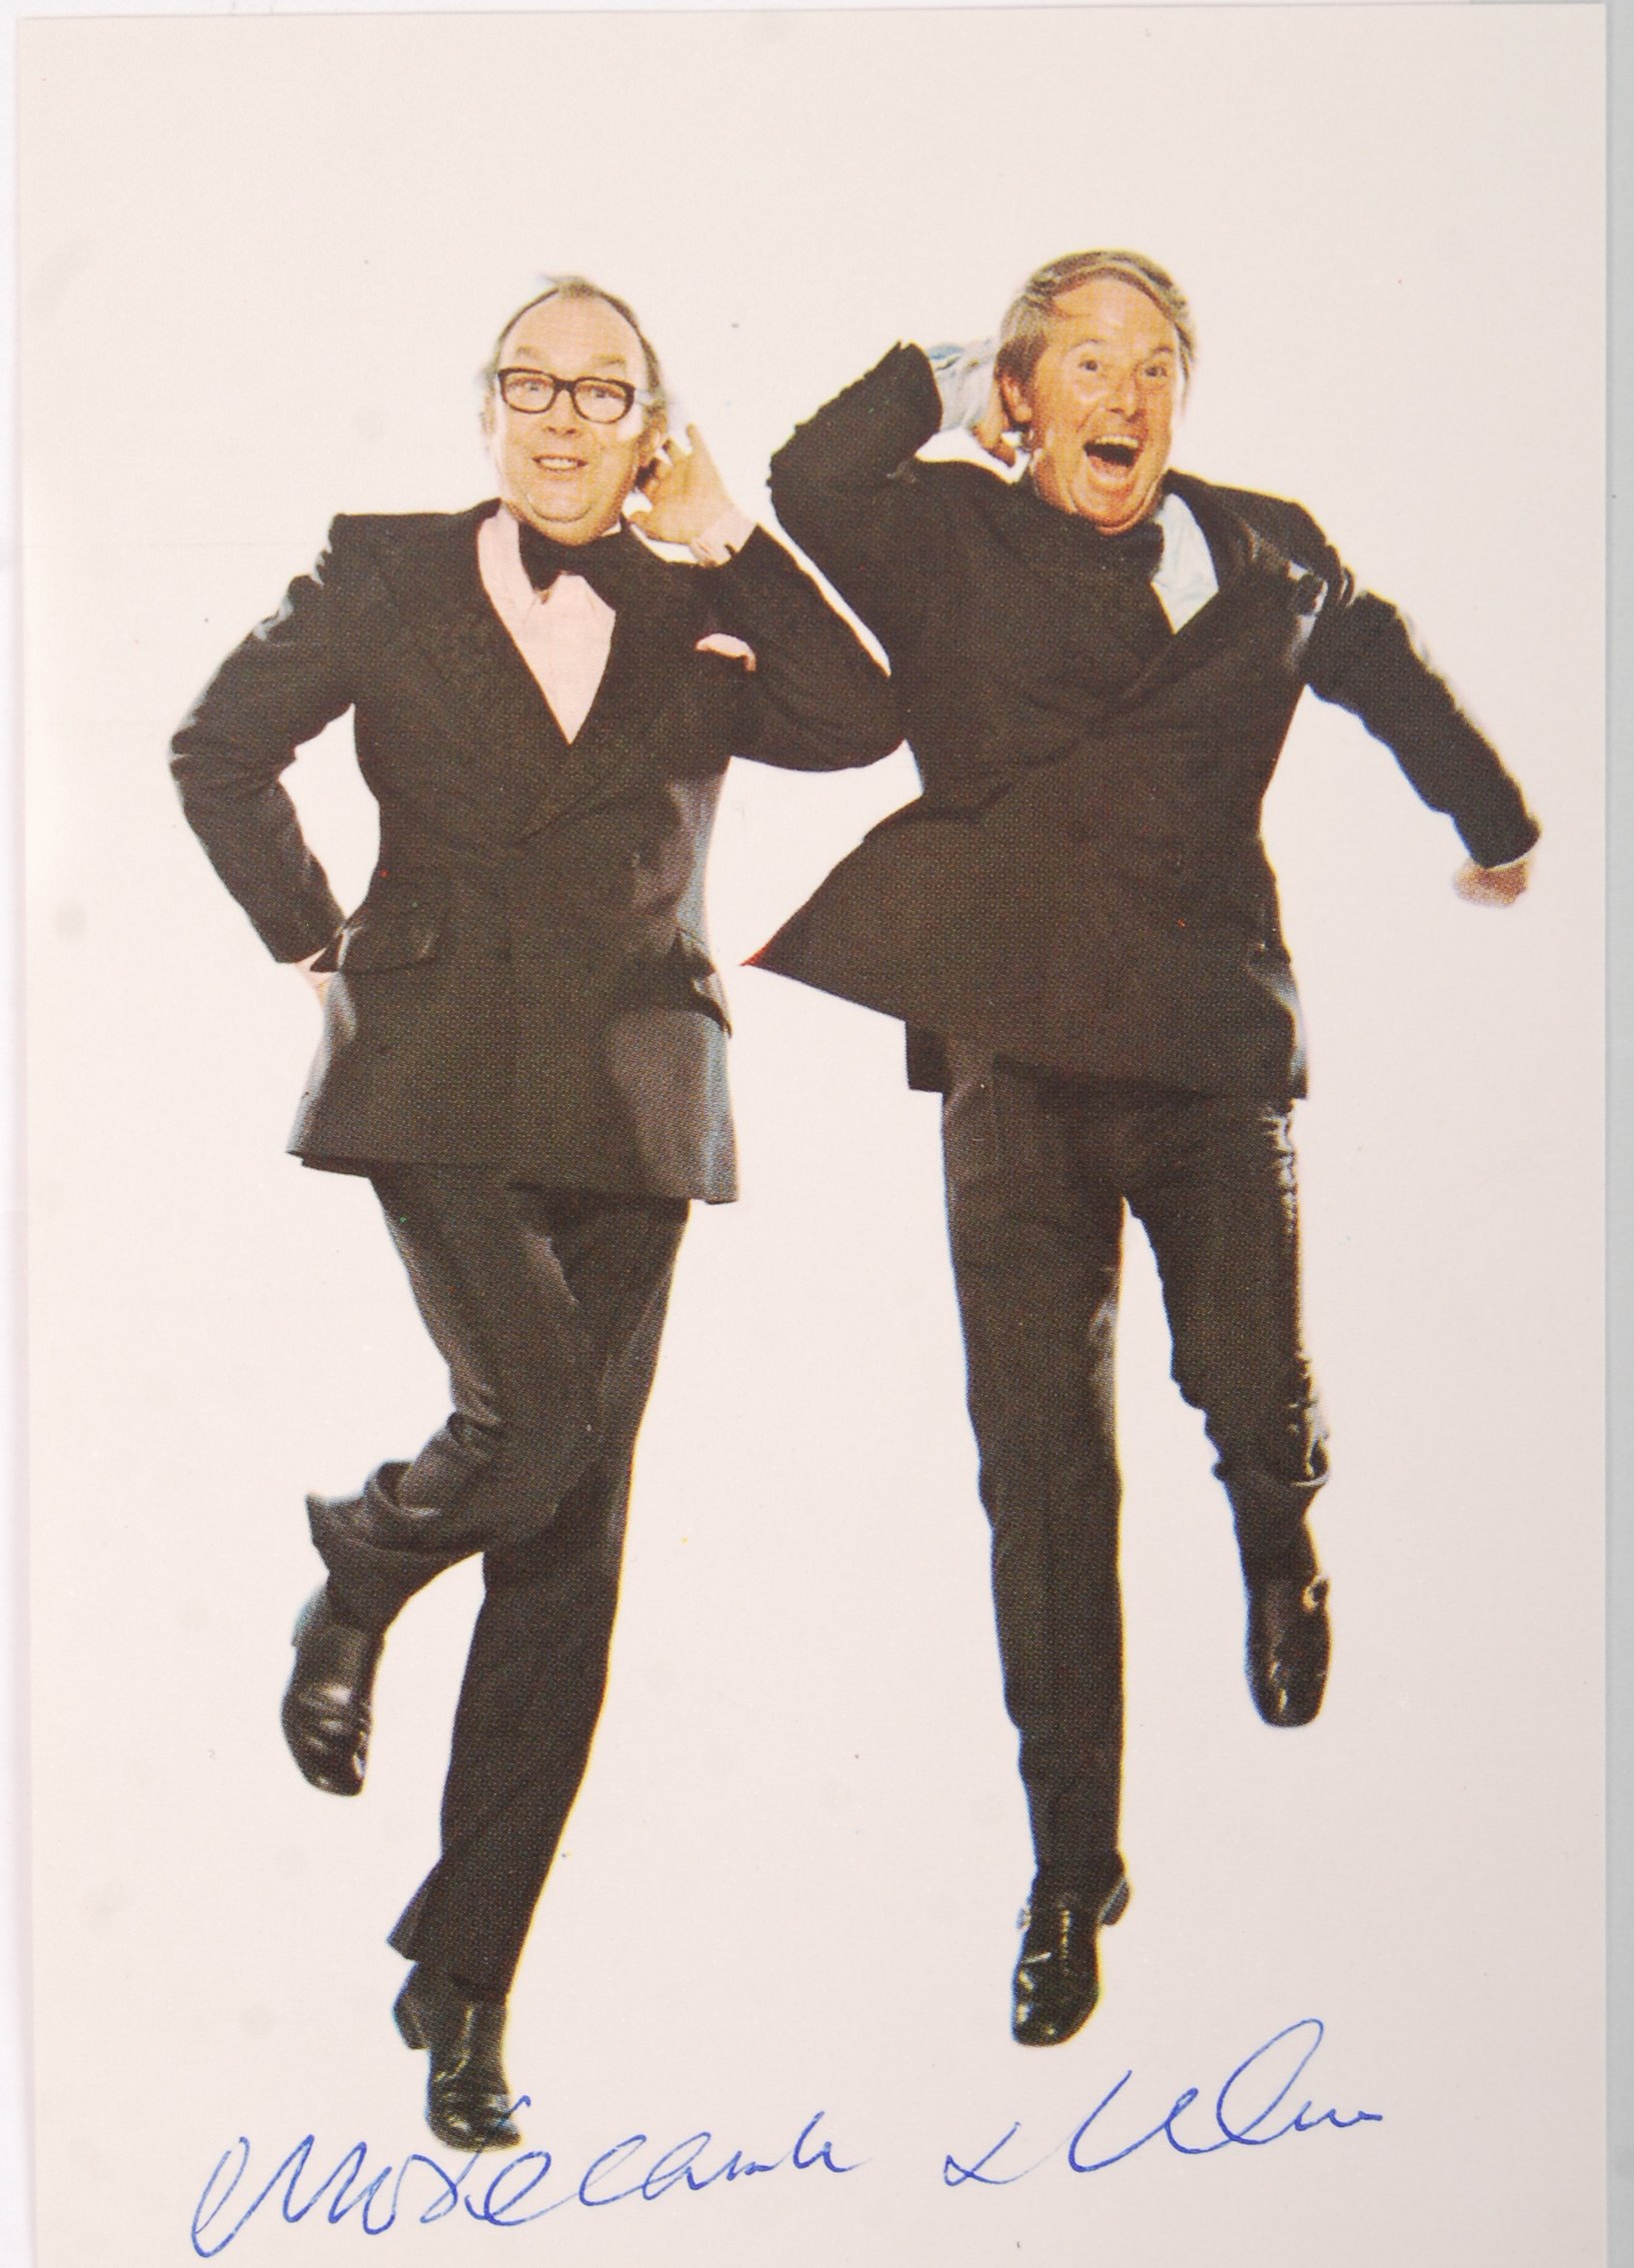 MORECAMBE & WISE - ORIGINAL SIGNED PUBLICITY PHOTOGRAPH - Image 2 of 3